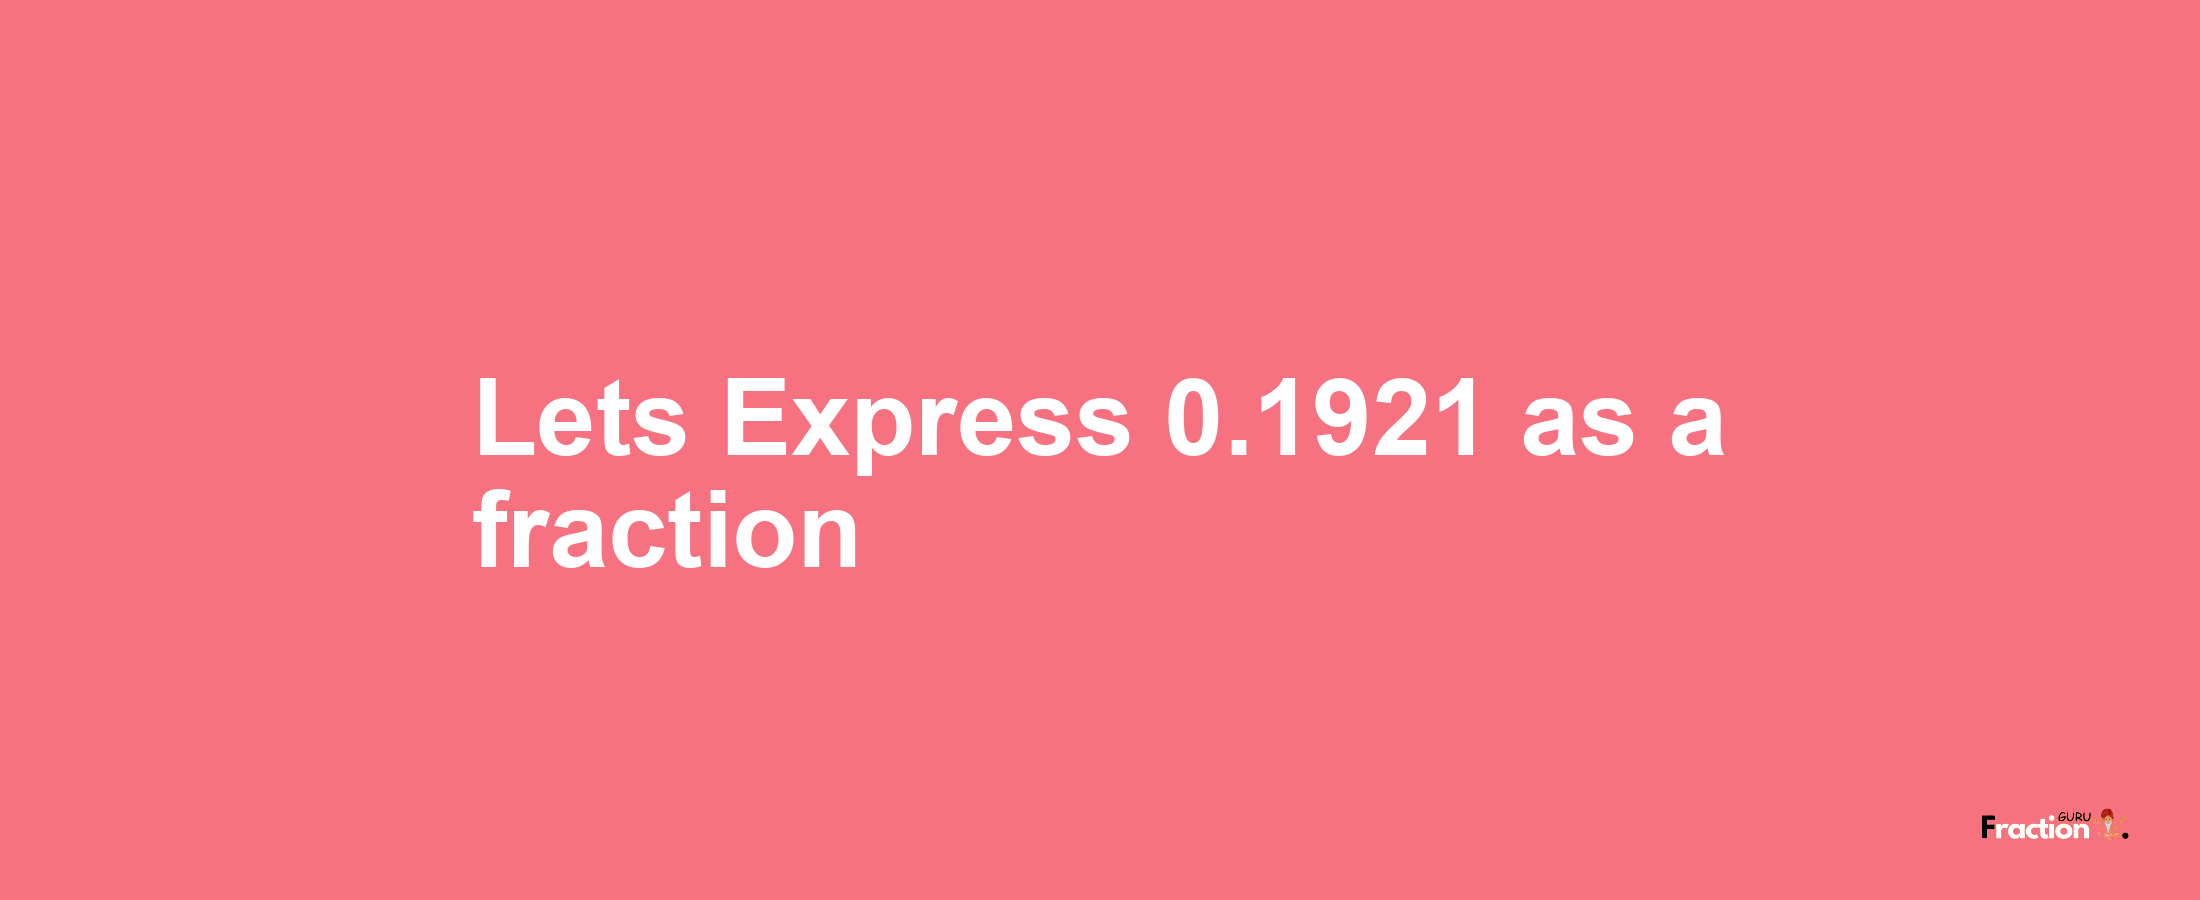 Lets Express 0.1921 as afraction